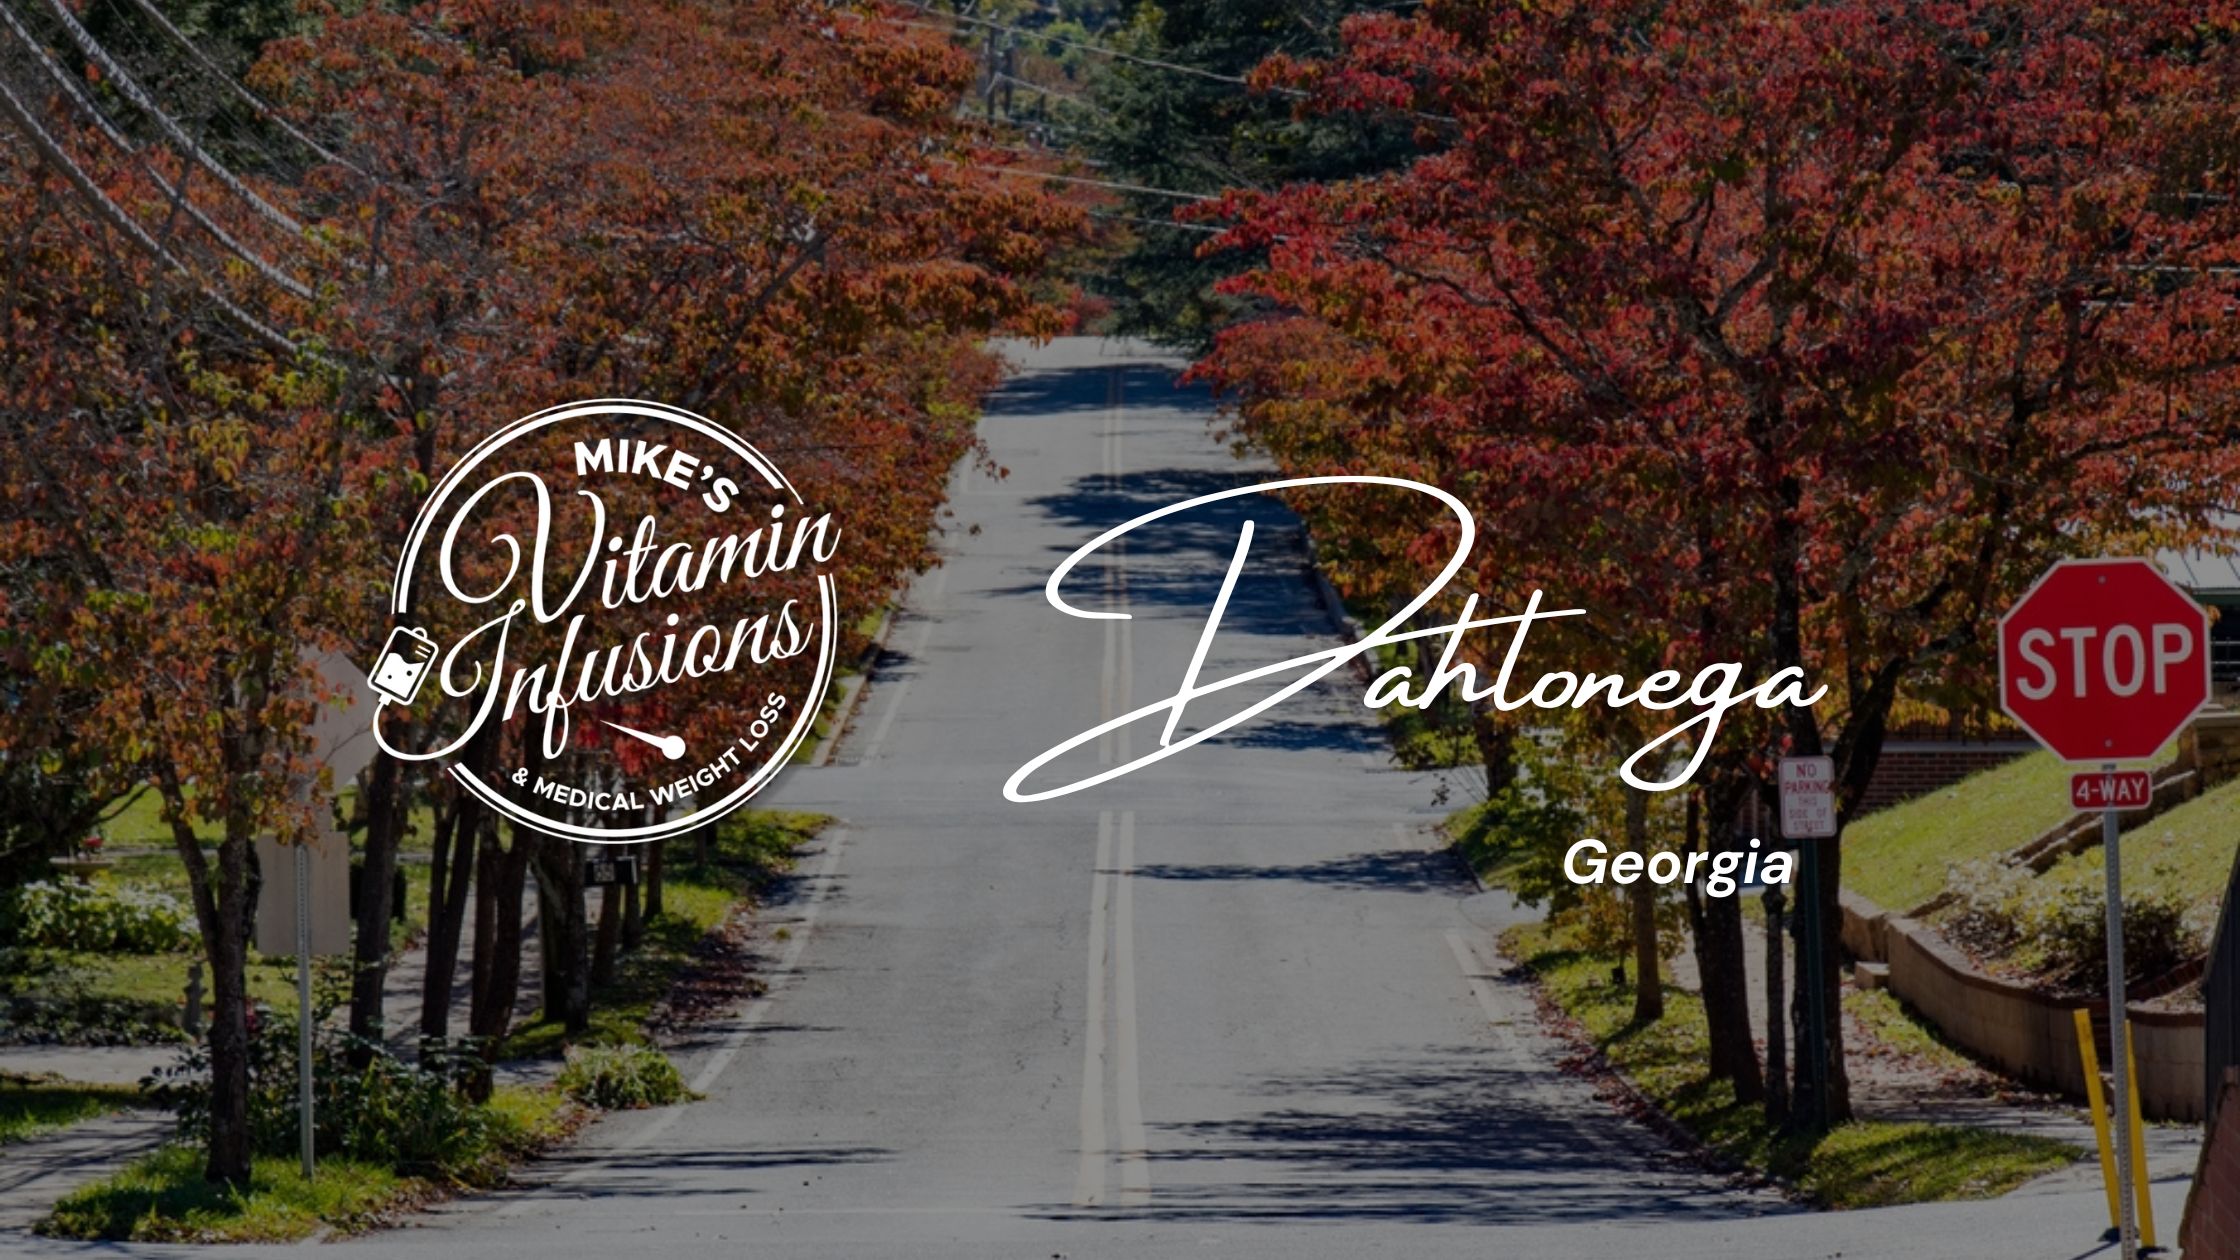 Image of a road in dahlonega with the mike's vitamin infusions logo